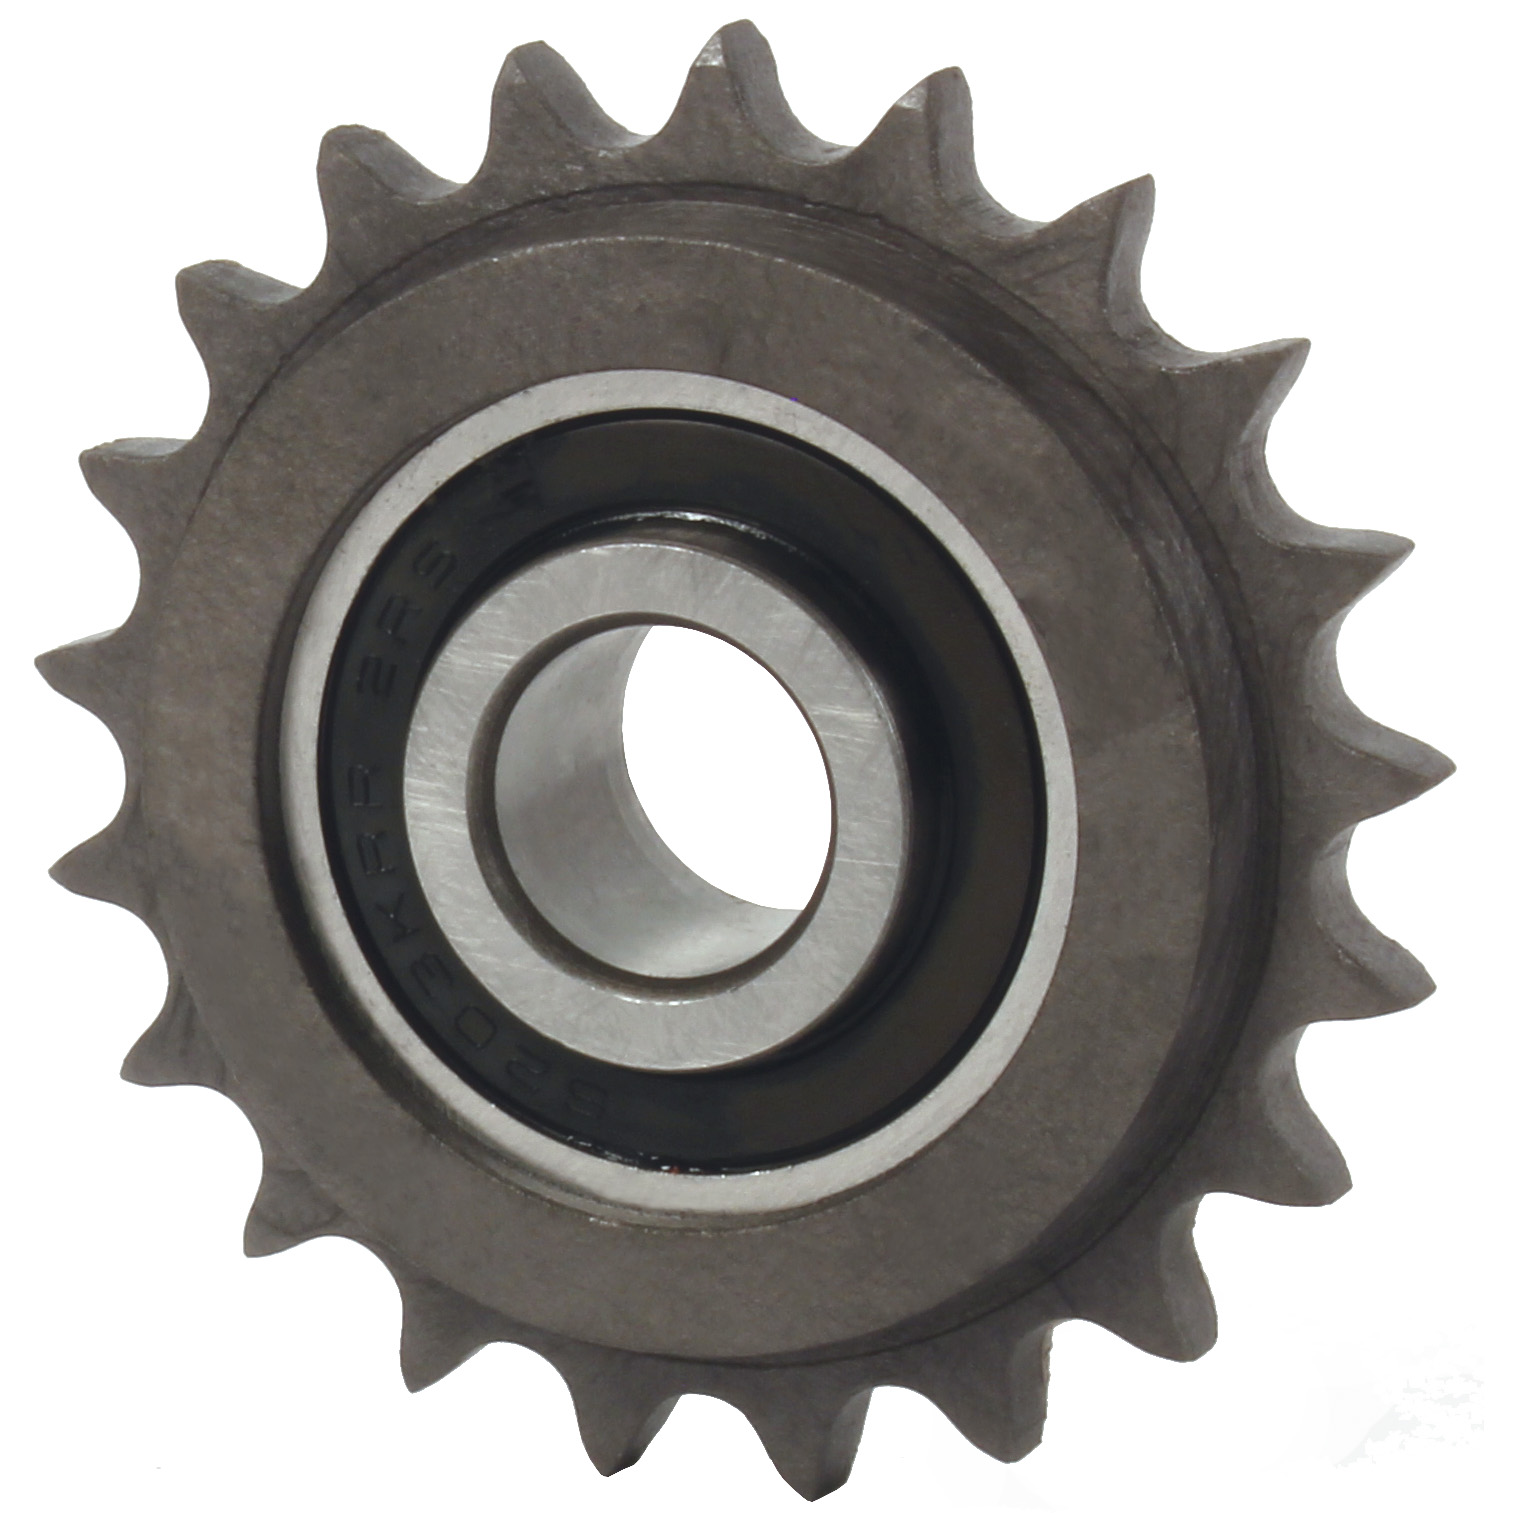 Chain idler sprocket - Chain idler sprocket - Steel - Steel - For use with SBR chains